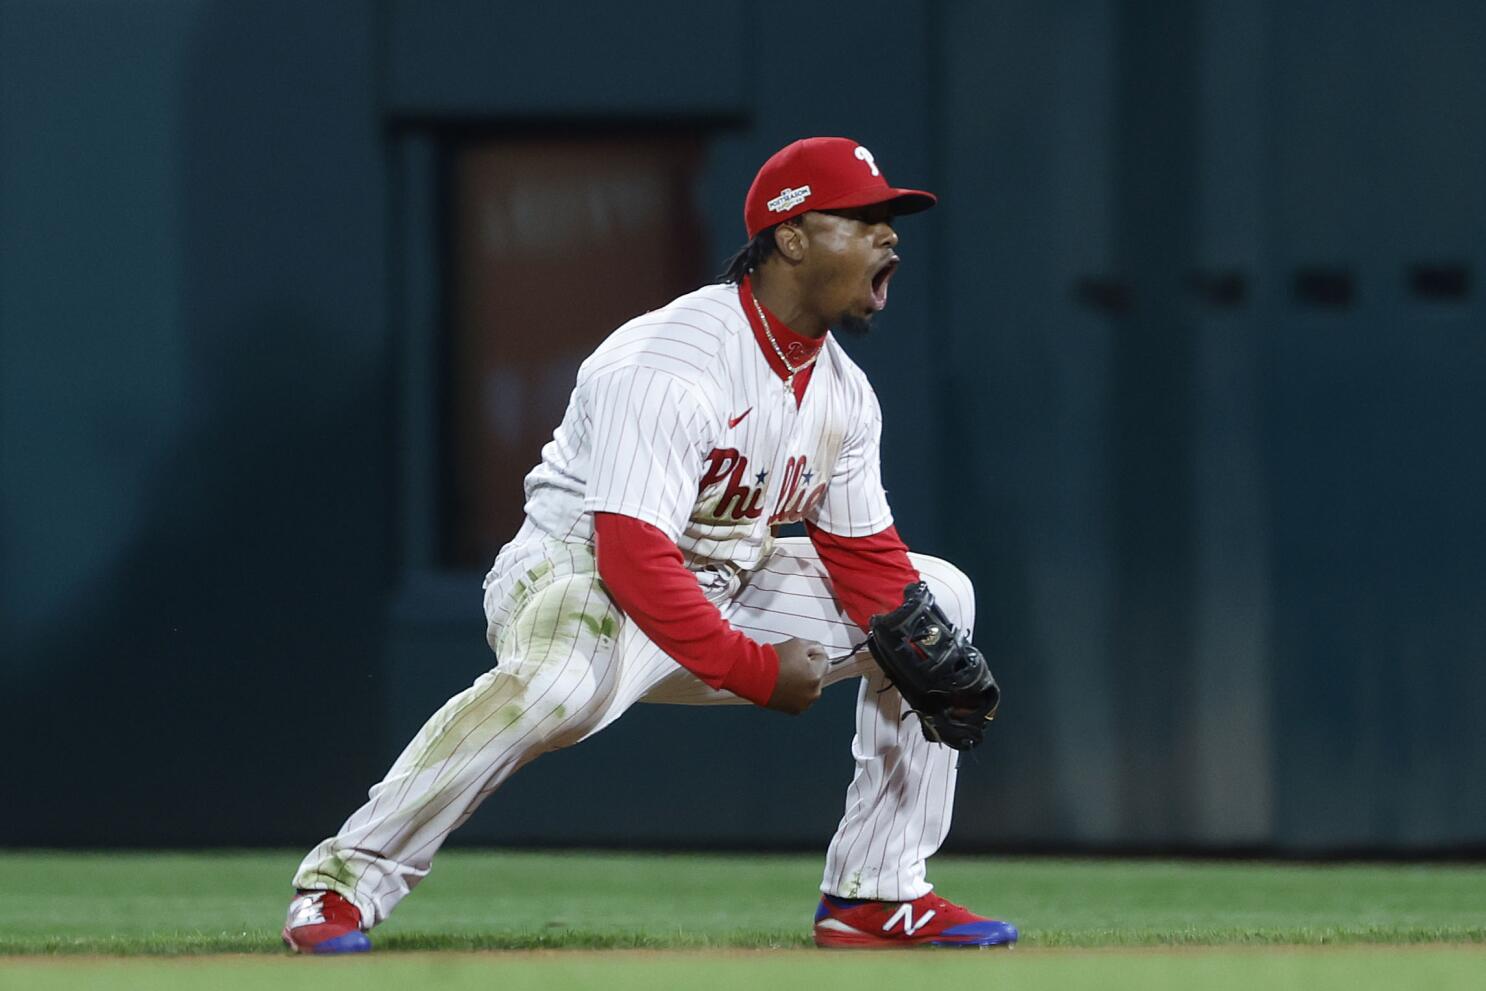 Phillies' Segura making most of his first trip to postseason - The